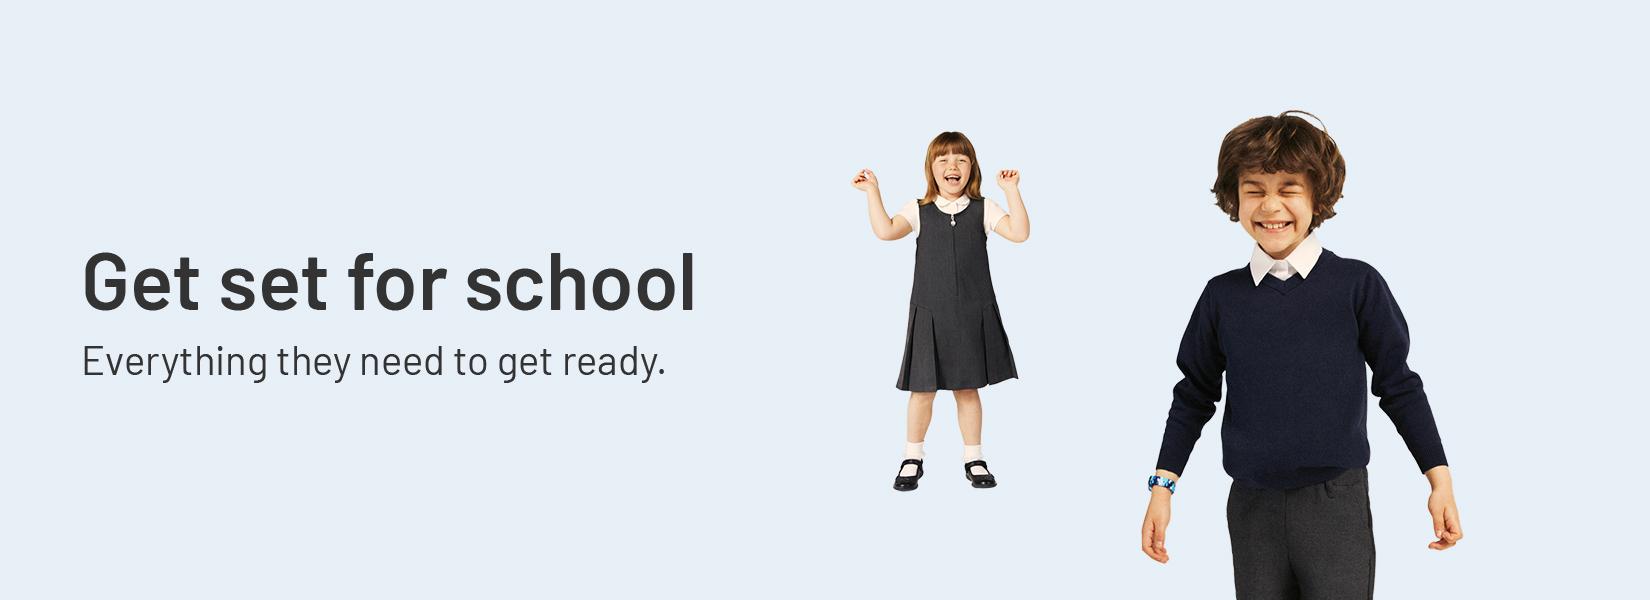 Get set for school. Everything they need to get ready.